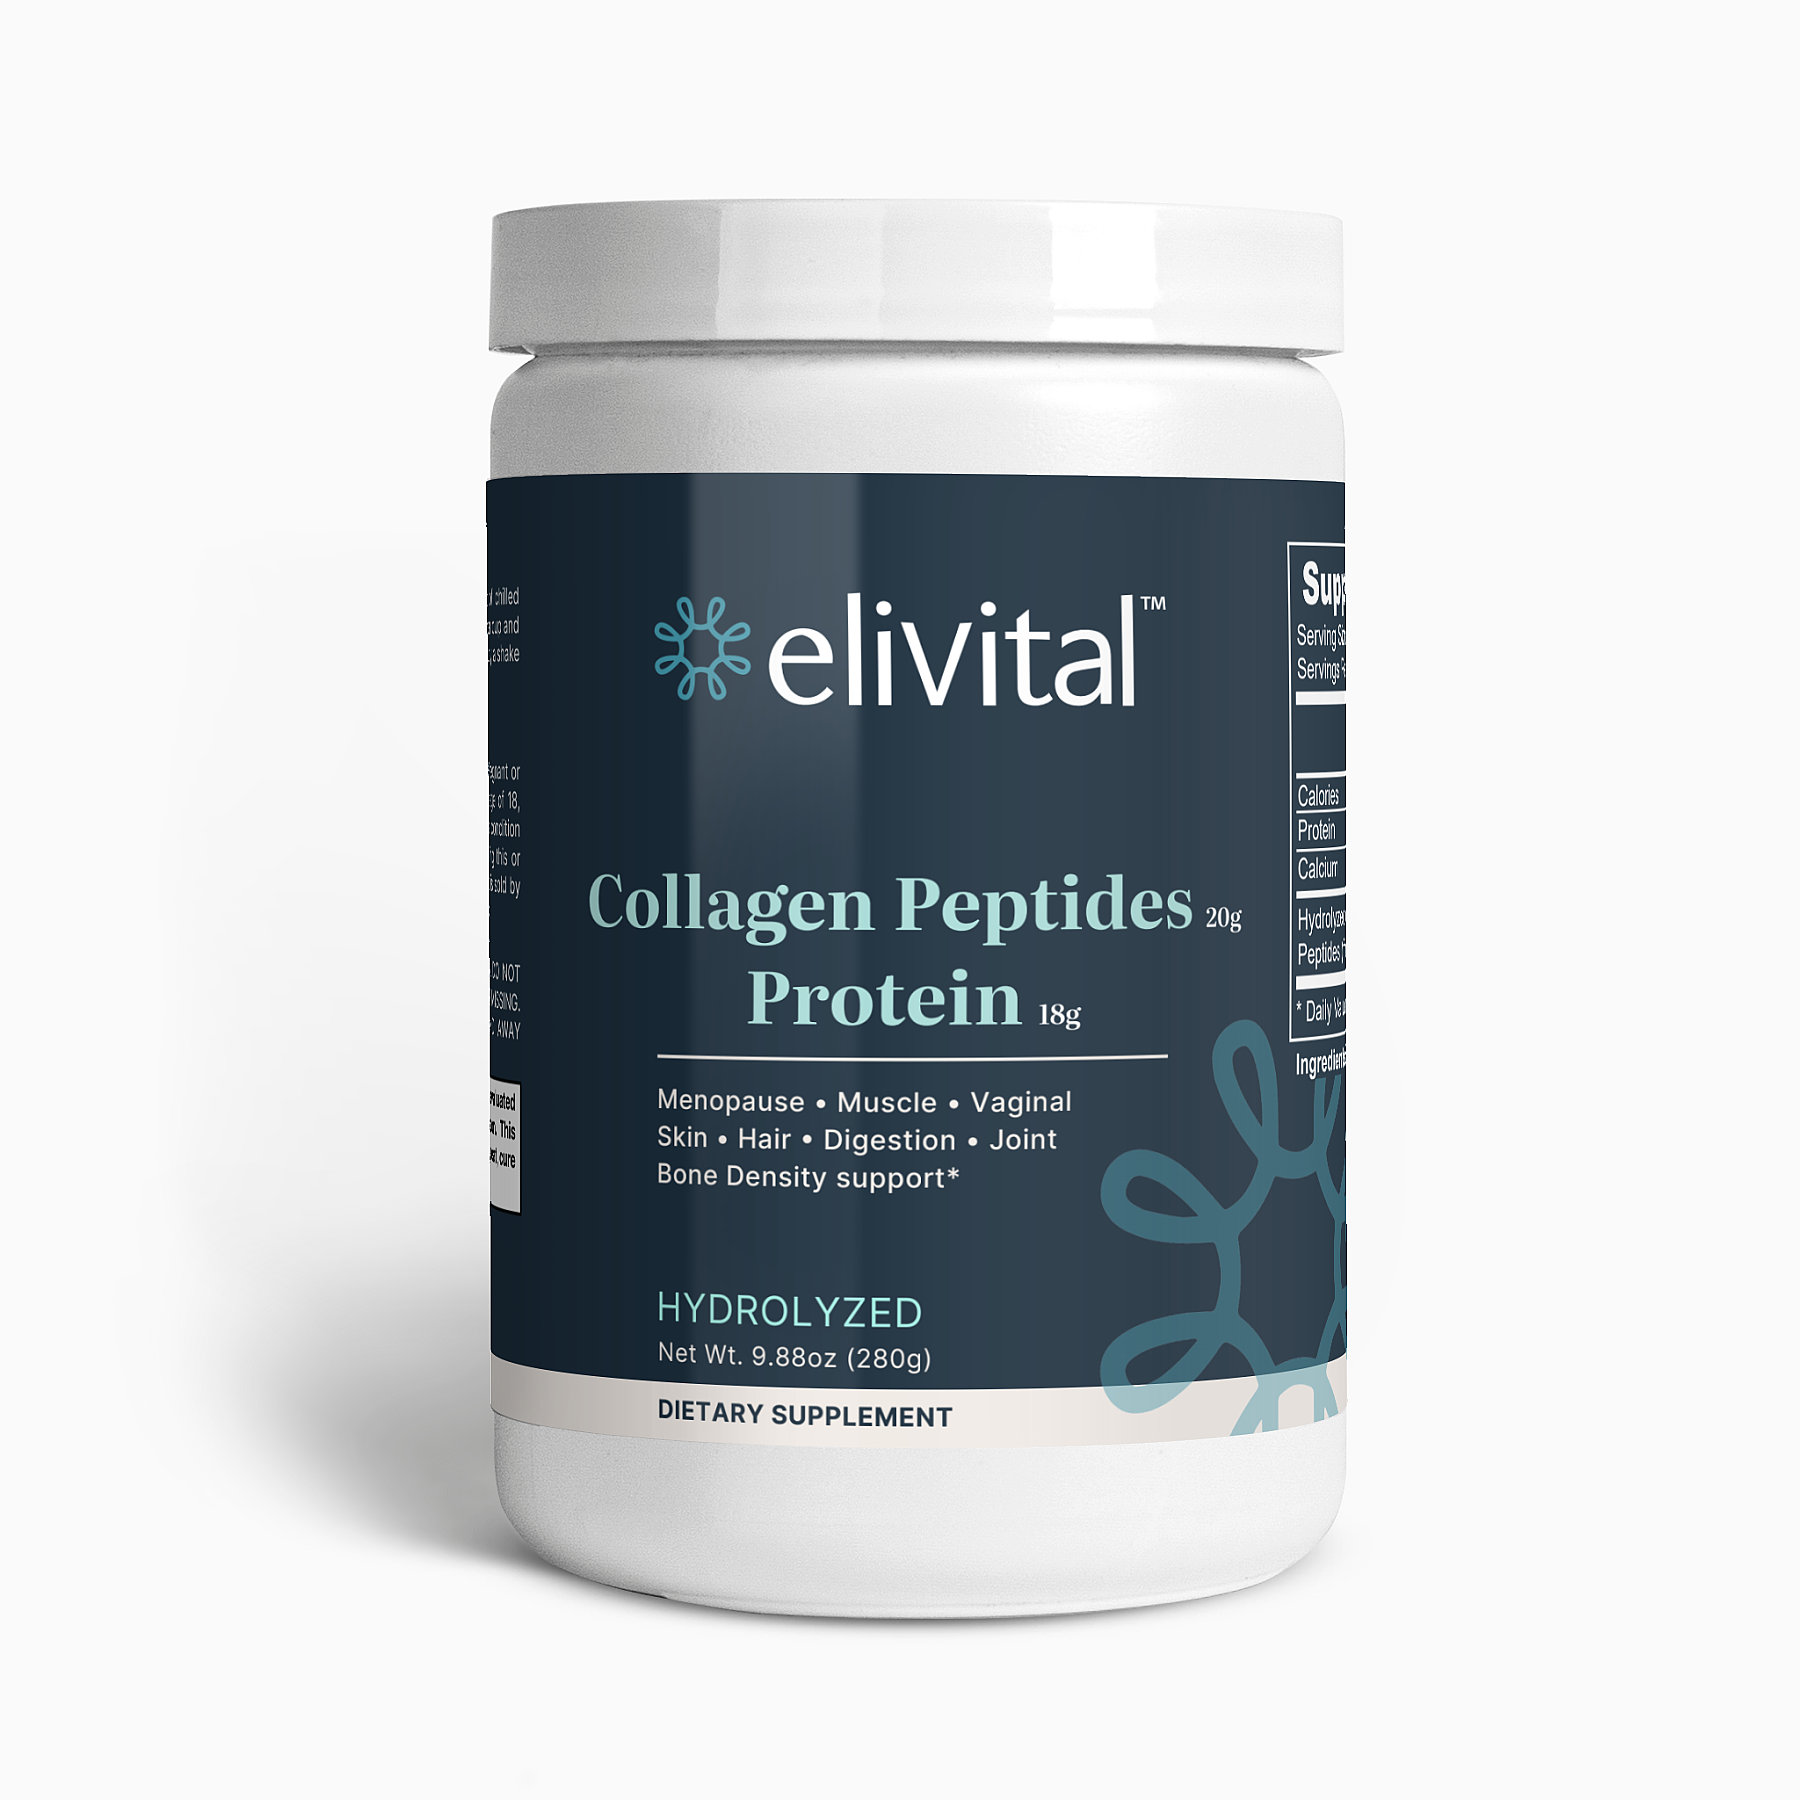 New Protein Collagen Product, Elivital, is Transforming Women’s Pelvic Health and Menopausal Wellness